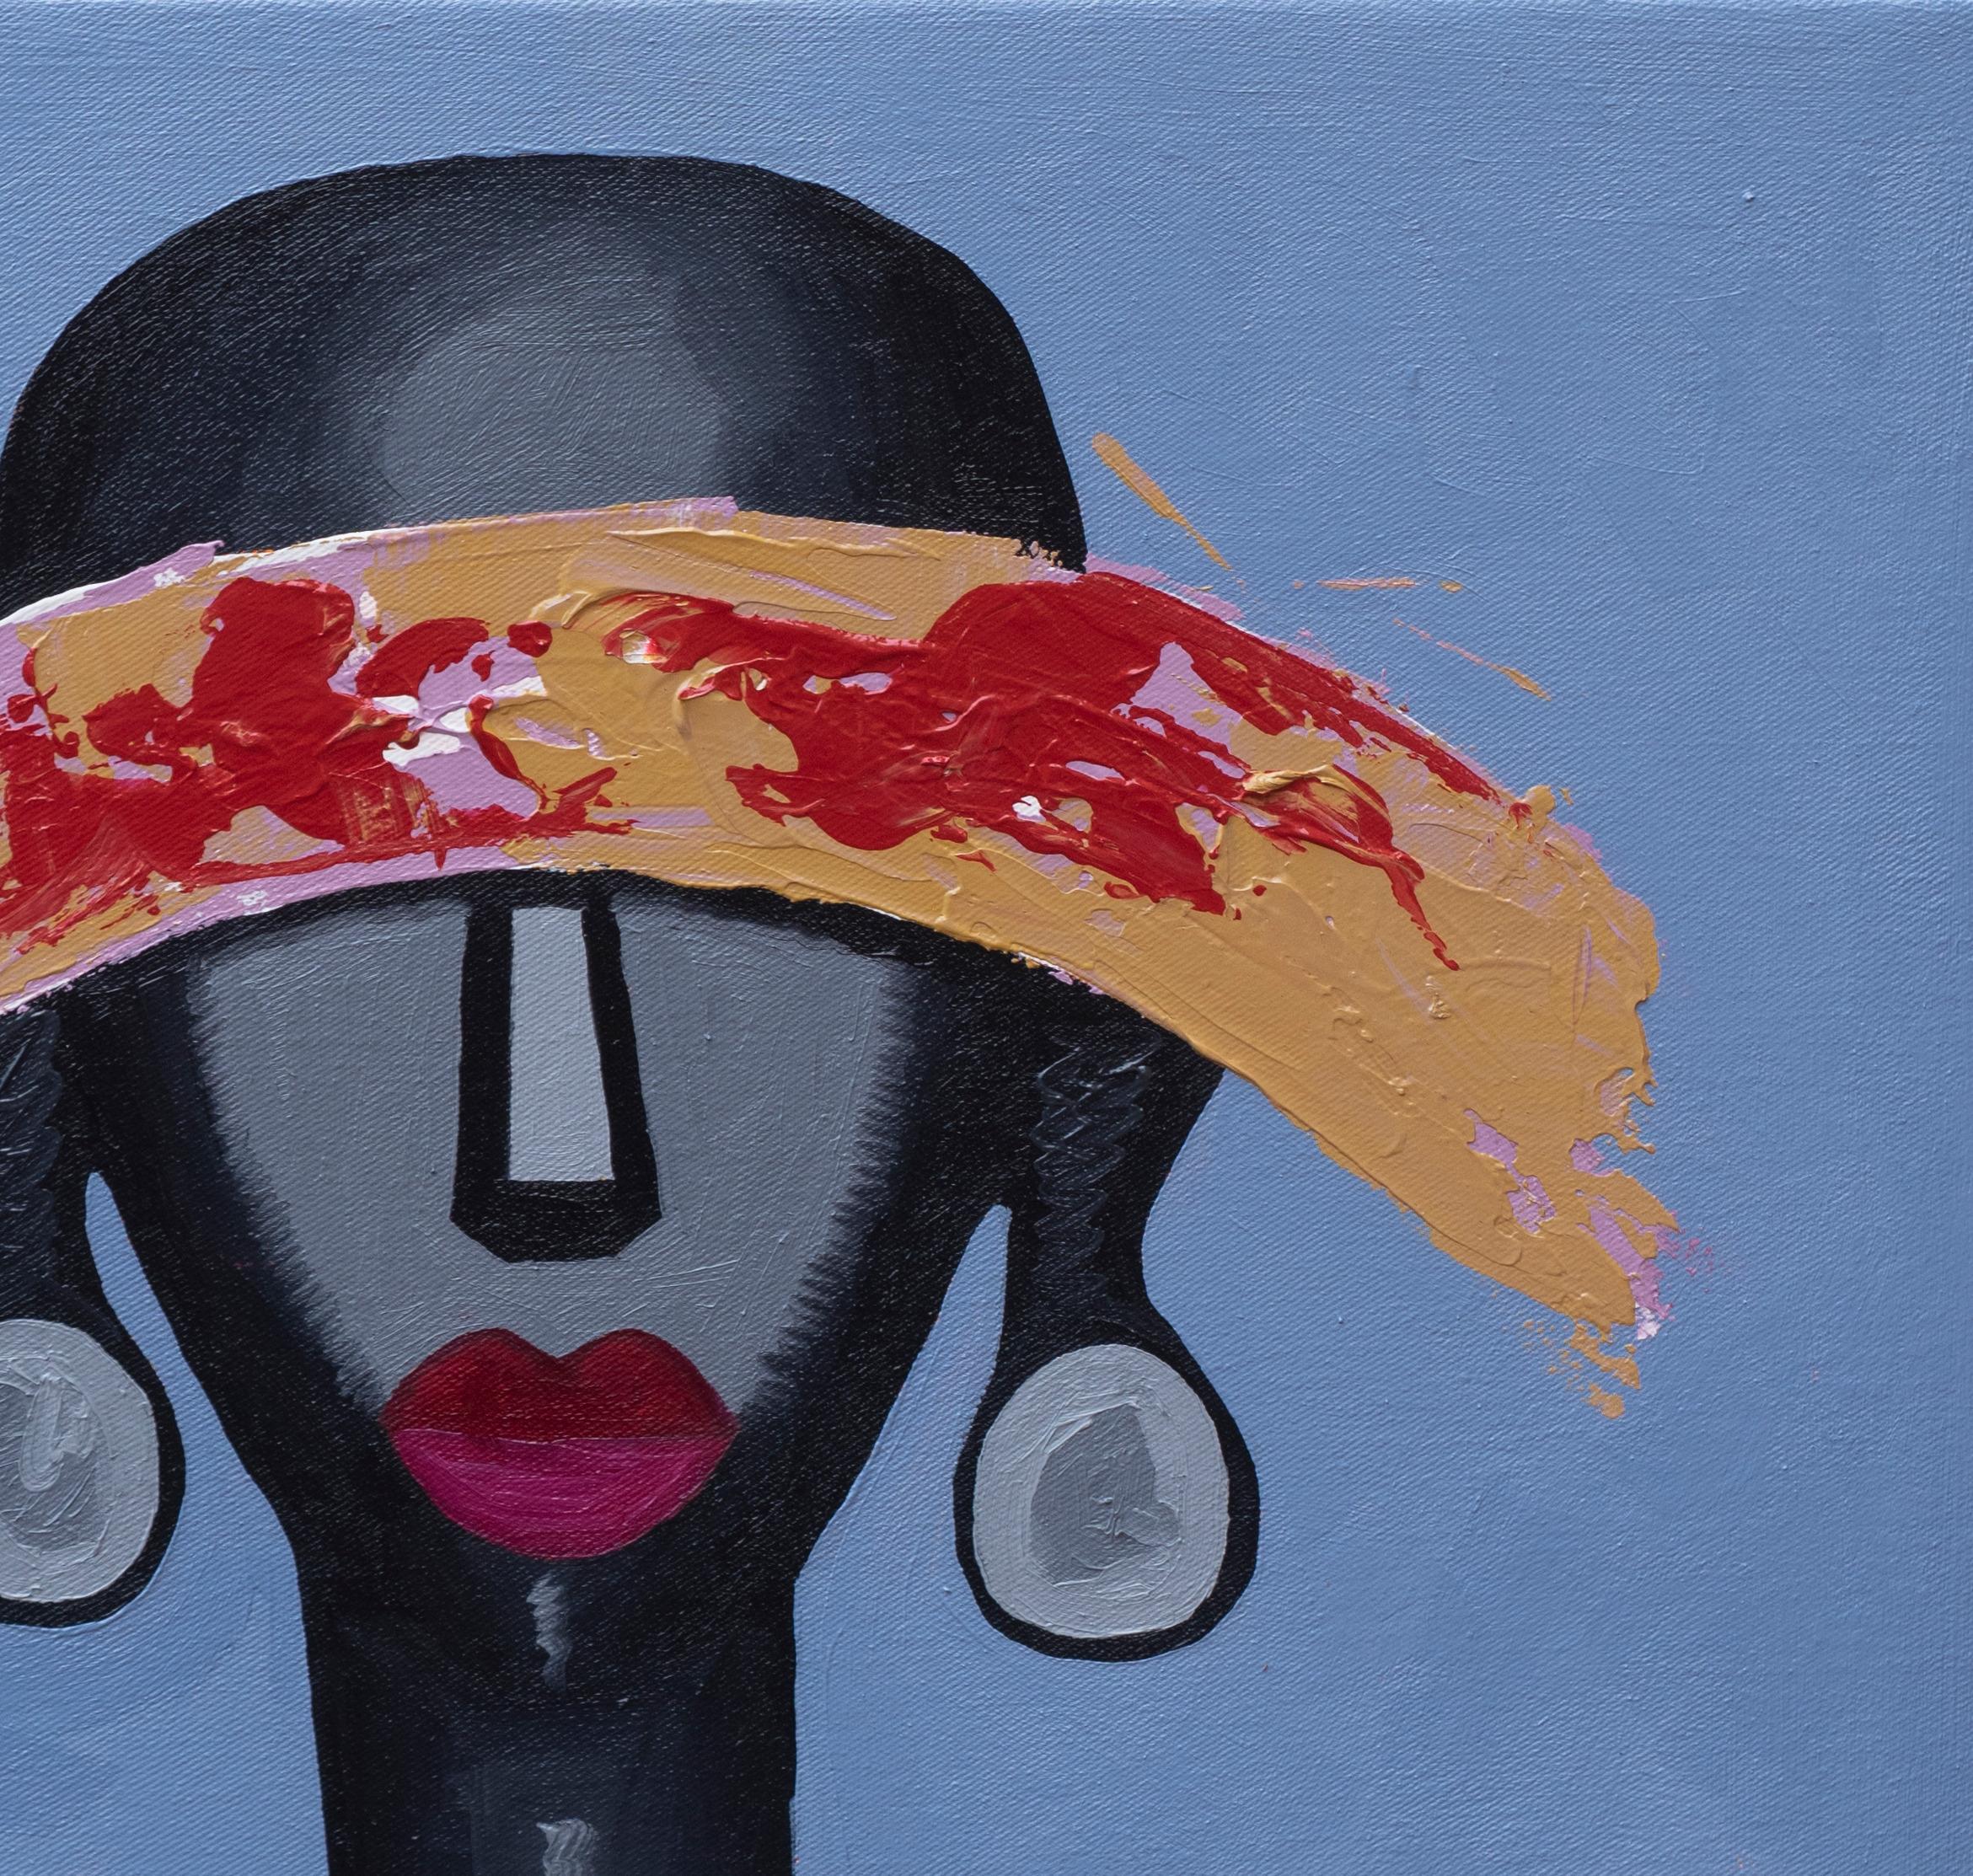 Out of Sight 1 - Neo-Expressionist Painting by Chinedu Chidebe